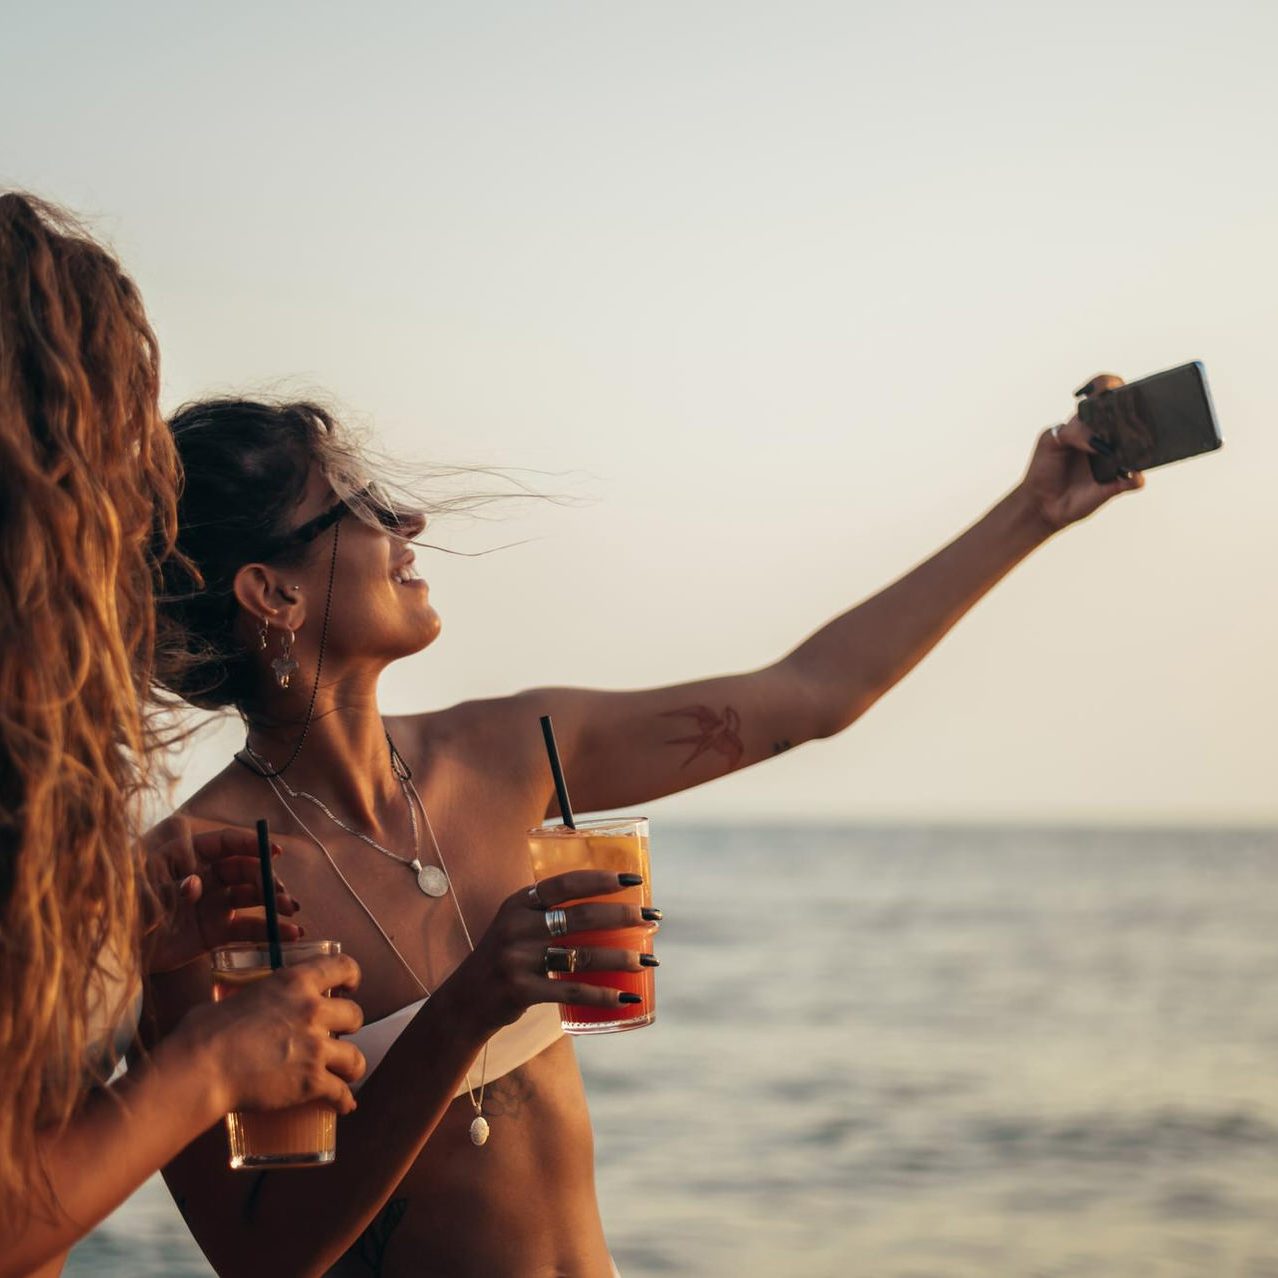 friends-enjoying-vacation-together-taking-selfie-beach-using-smartphone_1